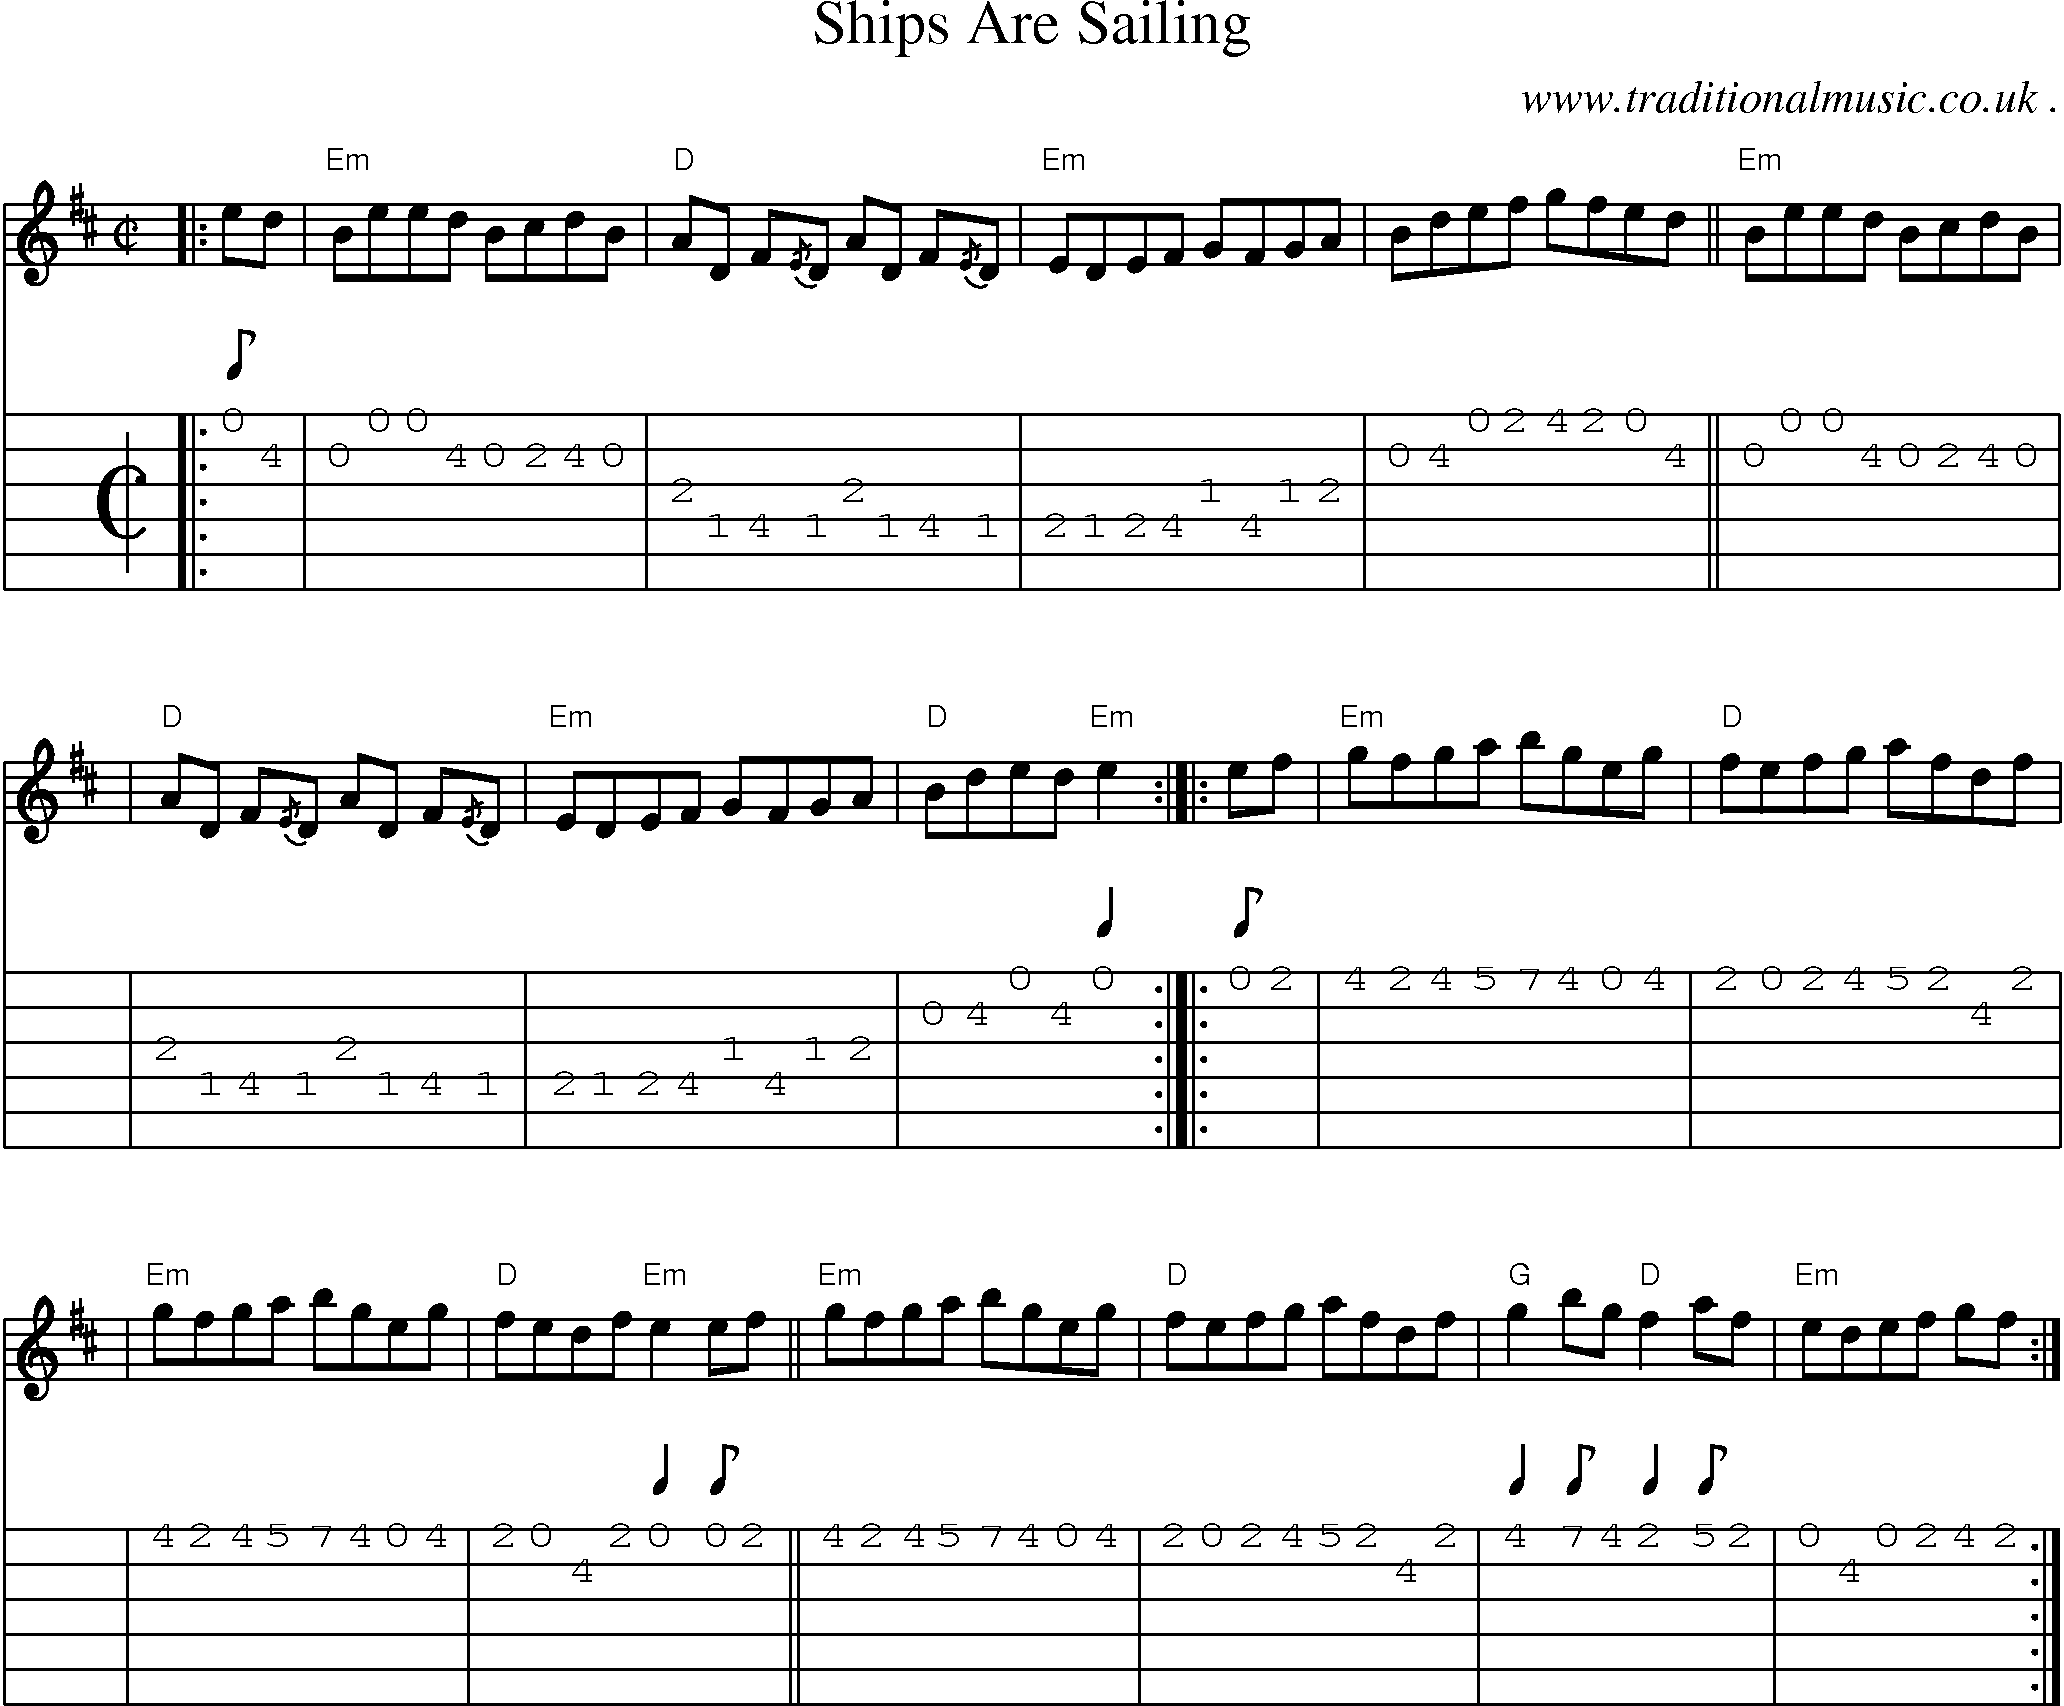 Sheet-music  score, Chords and Guitar Tabs for Ships Are Sailing